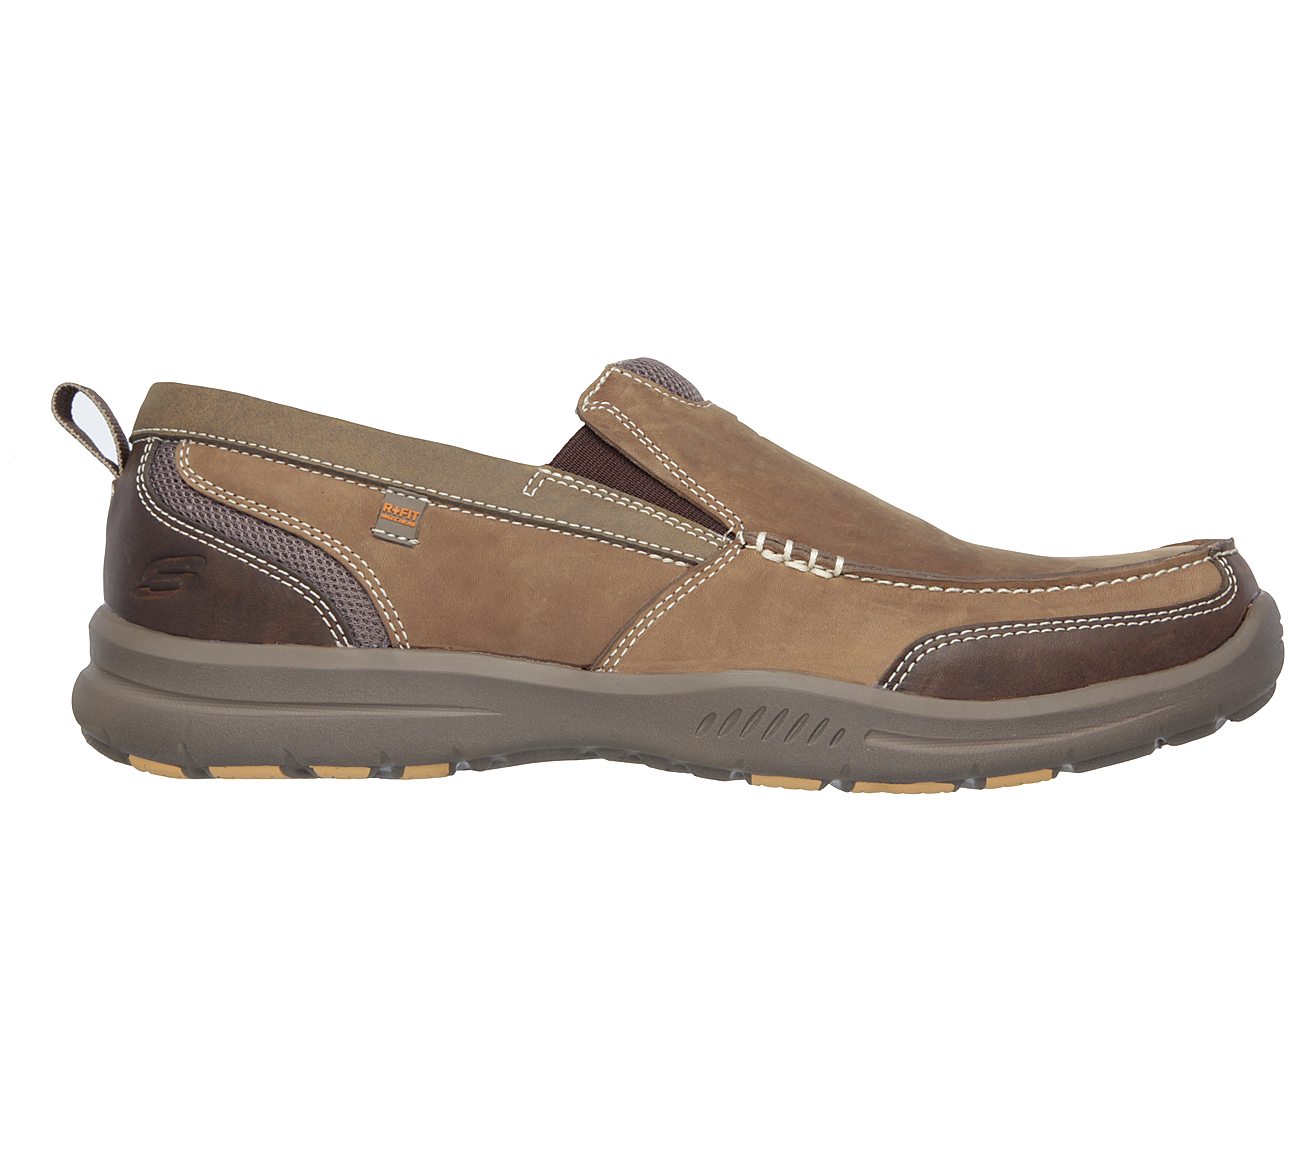 Buy SKECHERS Relaxed Fit: Elected - Brano USA Casuals Shoes